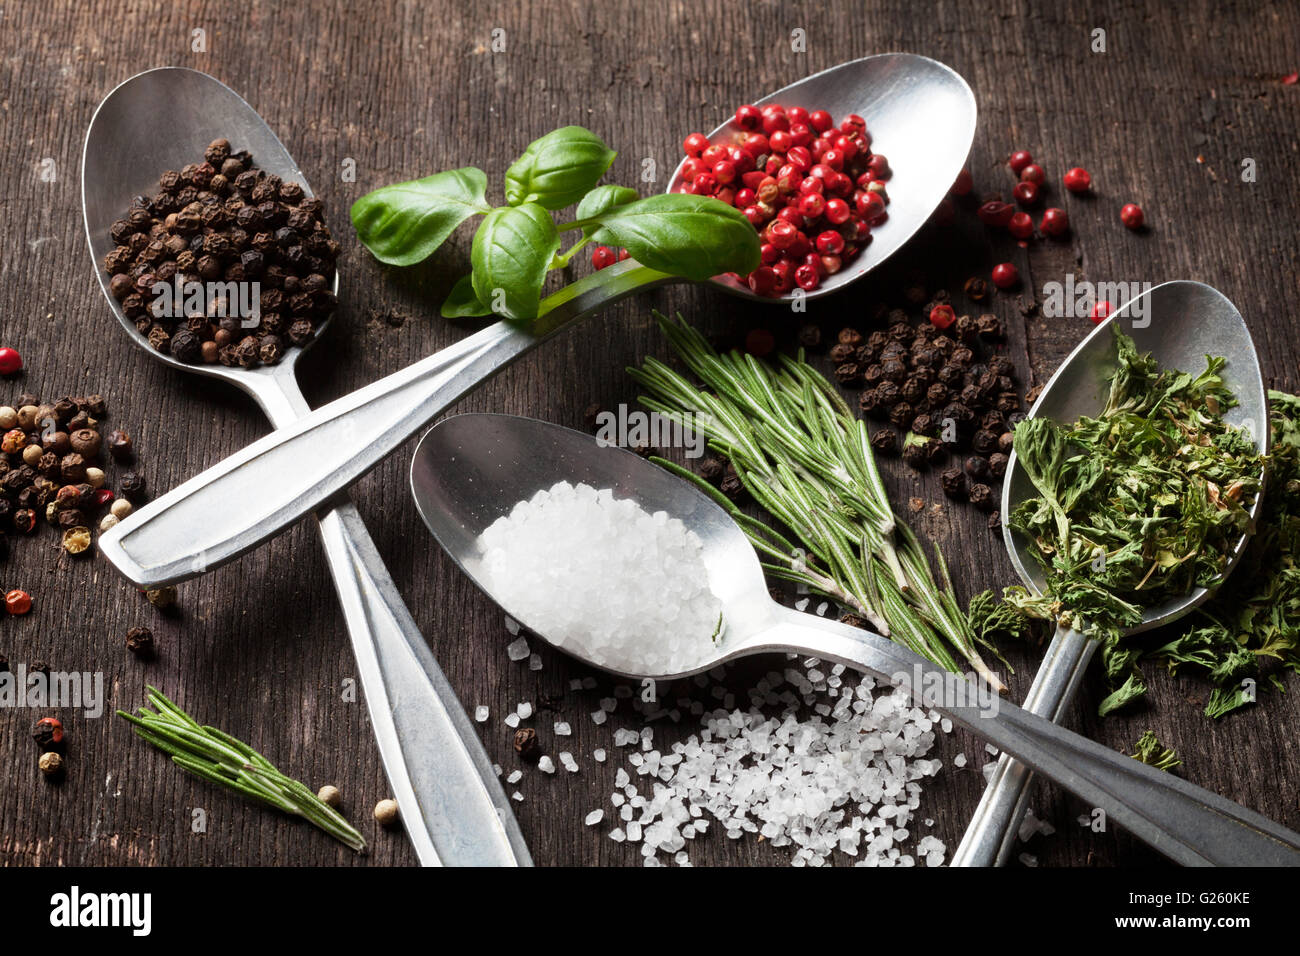 Herbs and spices on wooden table Stock Photo